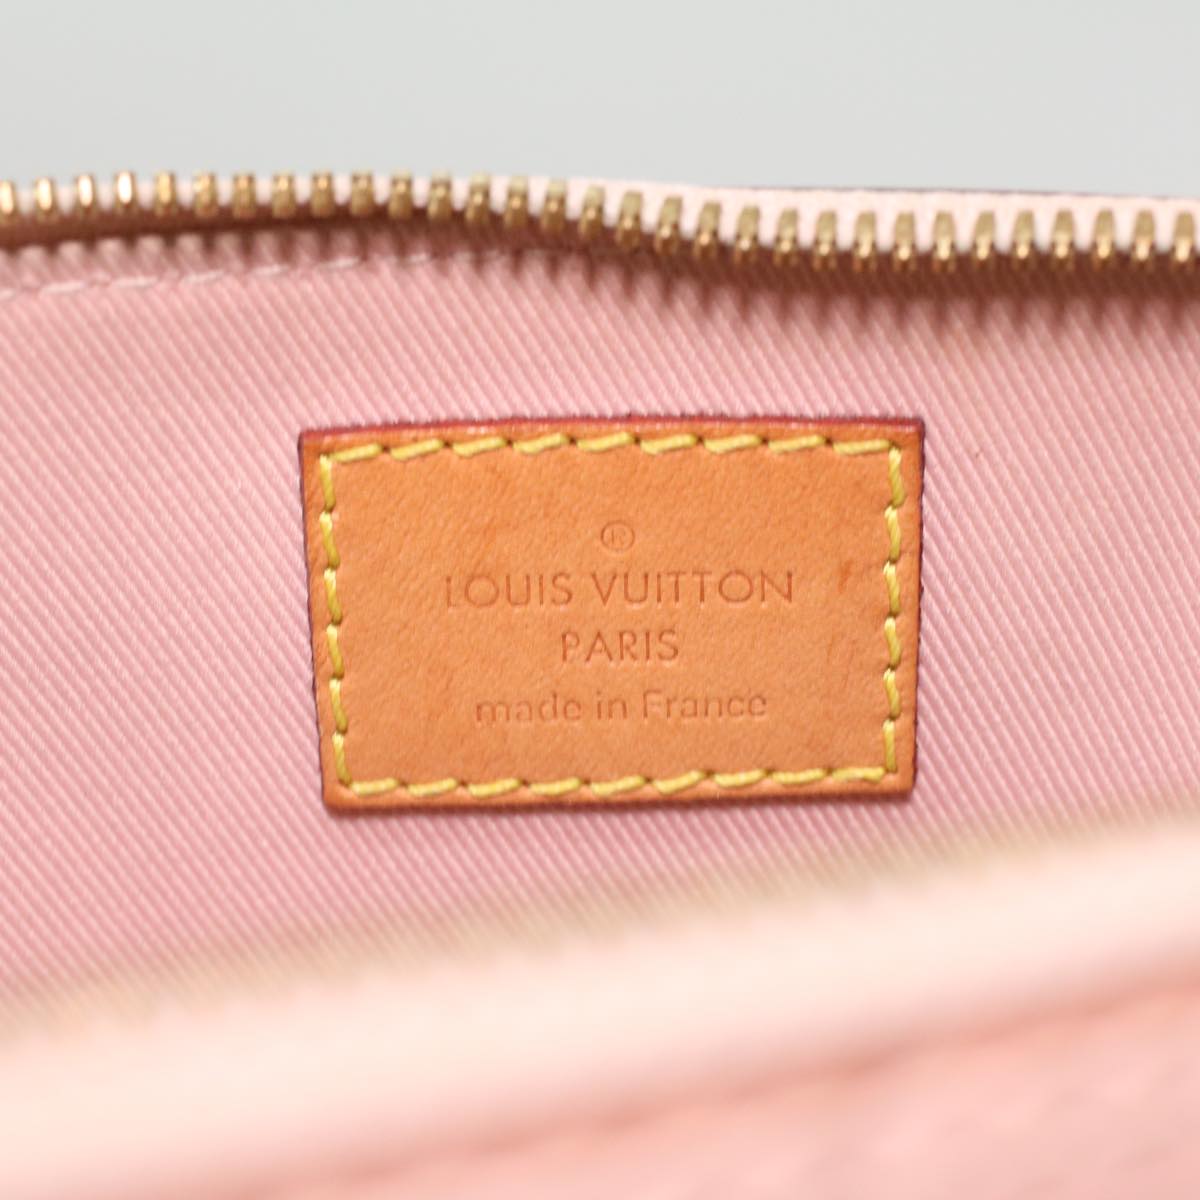 Louis Vuitton Pink Patent leather Alma BB handbag bag – Luxe Supply Company